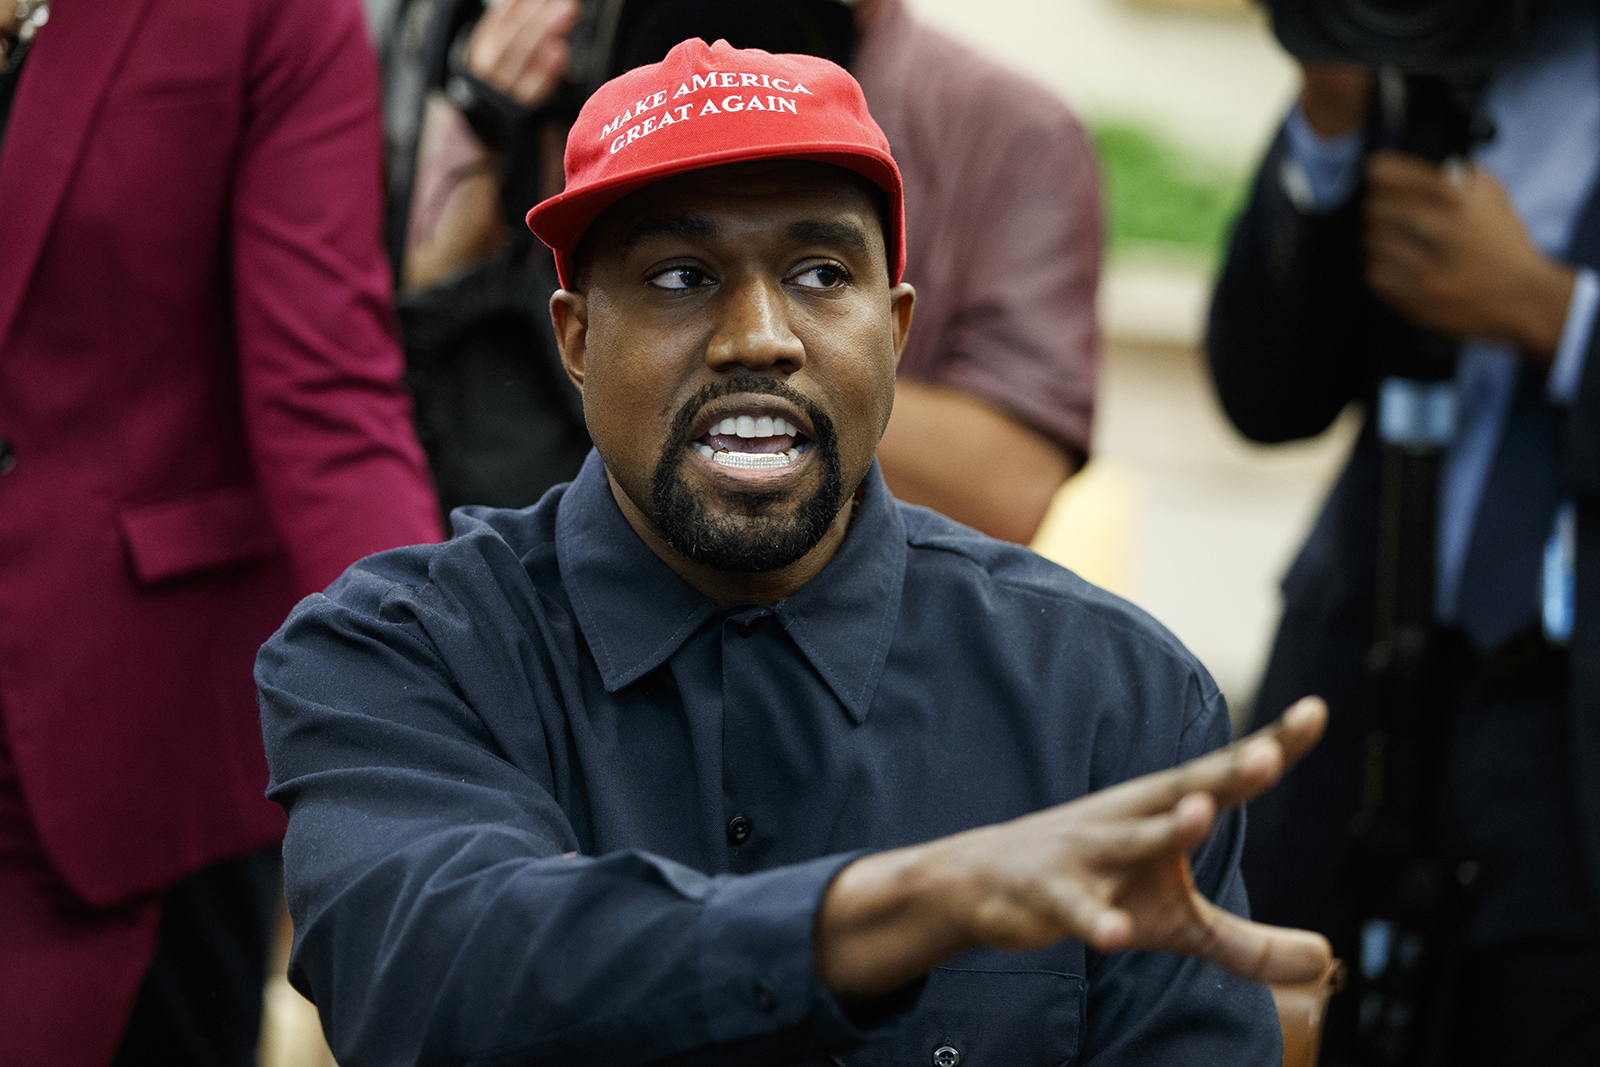 Kanye West speaks during a meeting in the Oval Office of the White House with President Donald Trump, in Washington, Oct. 11, 2018. (AP Photo/Evan Vucci)